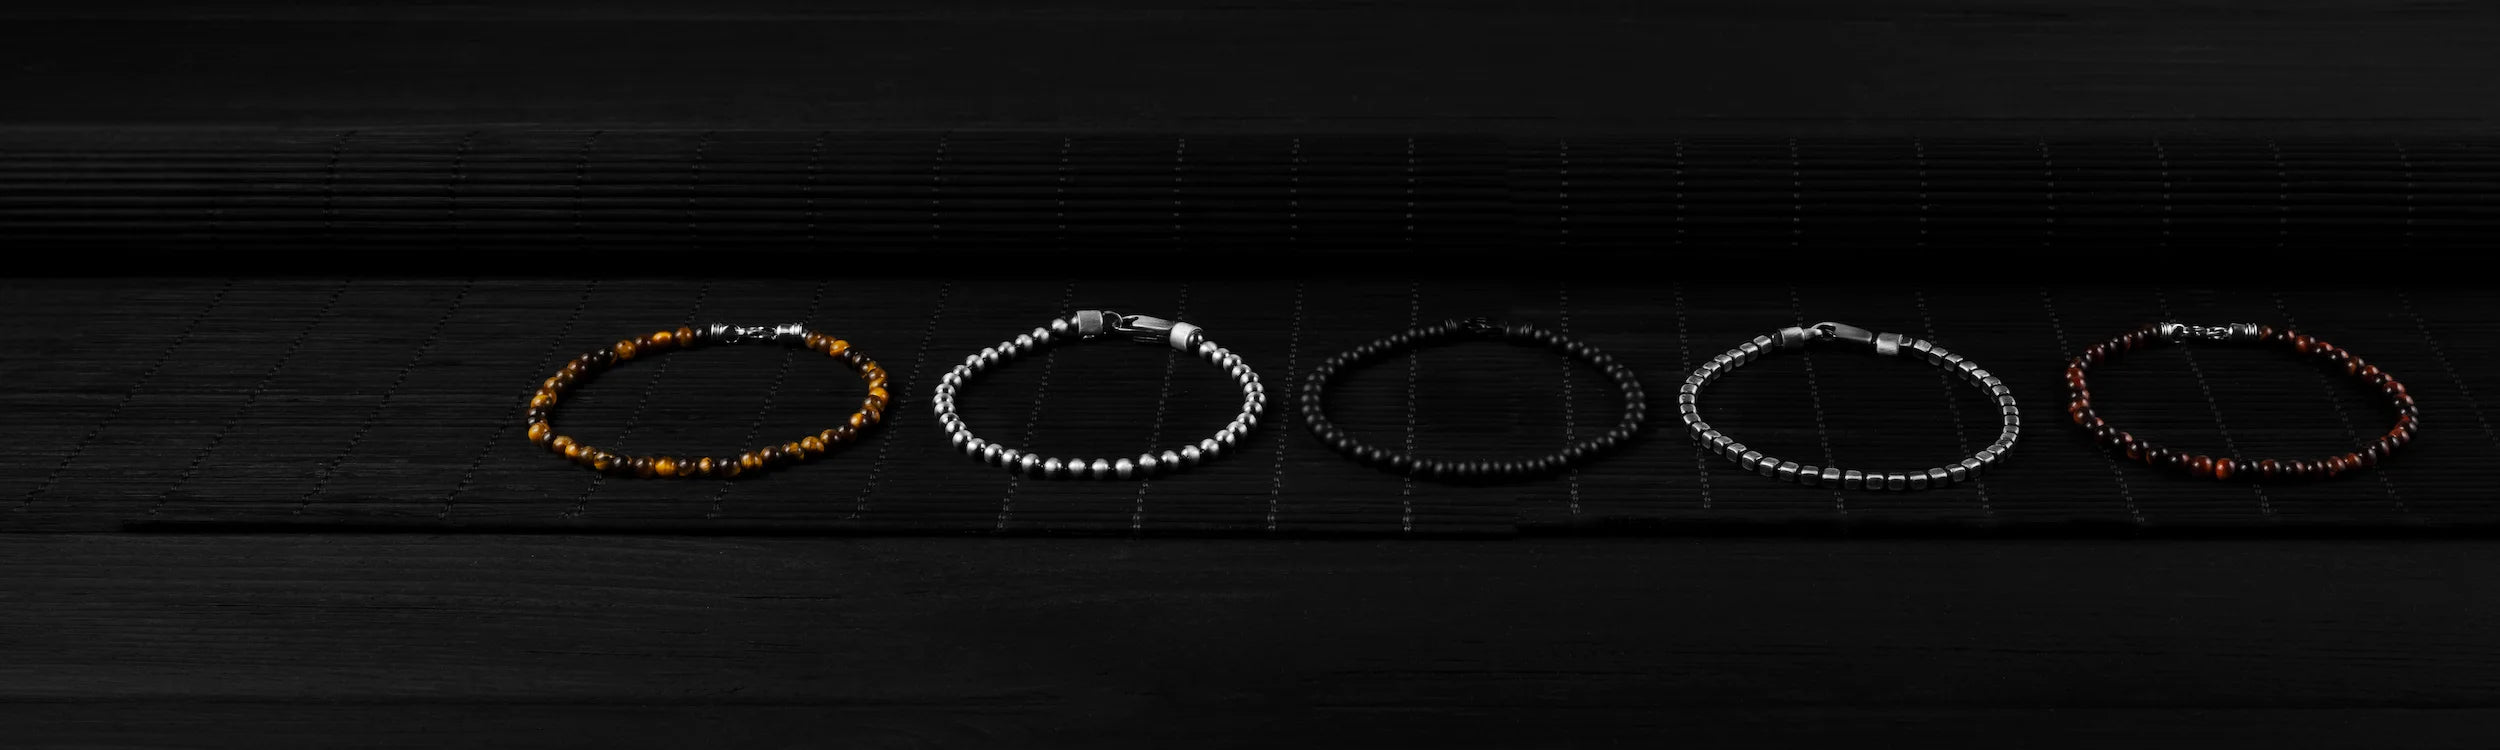 Three bracelets stacked in marble with black background